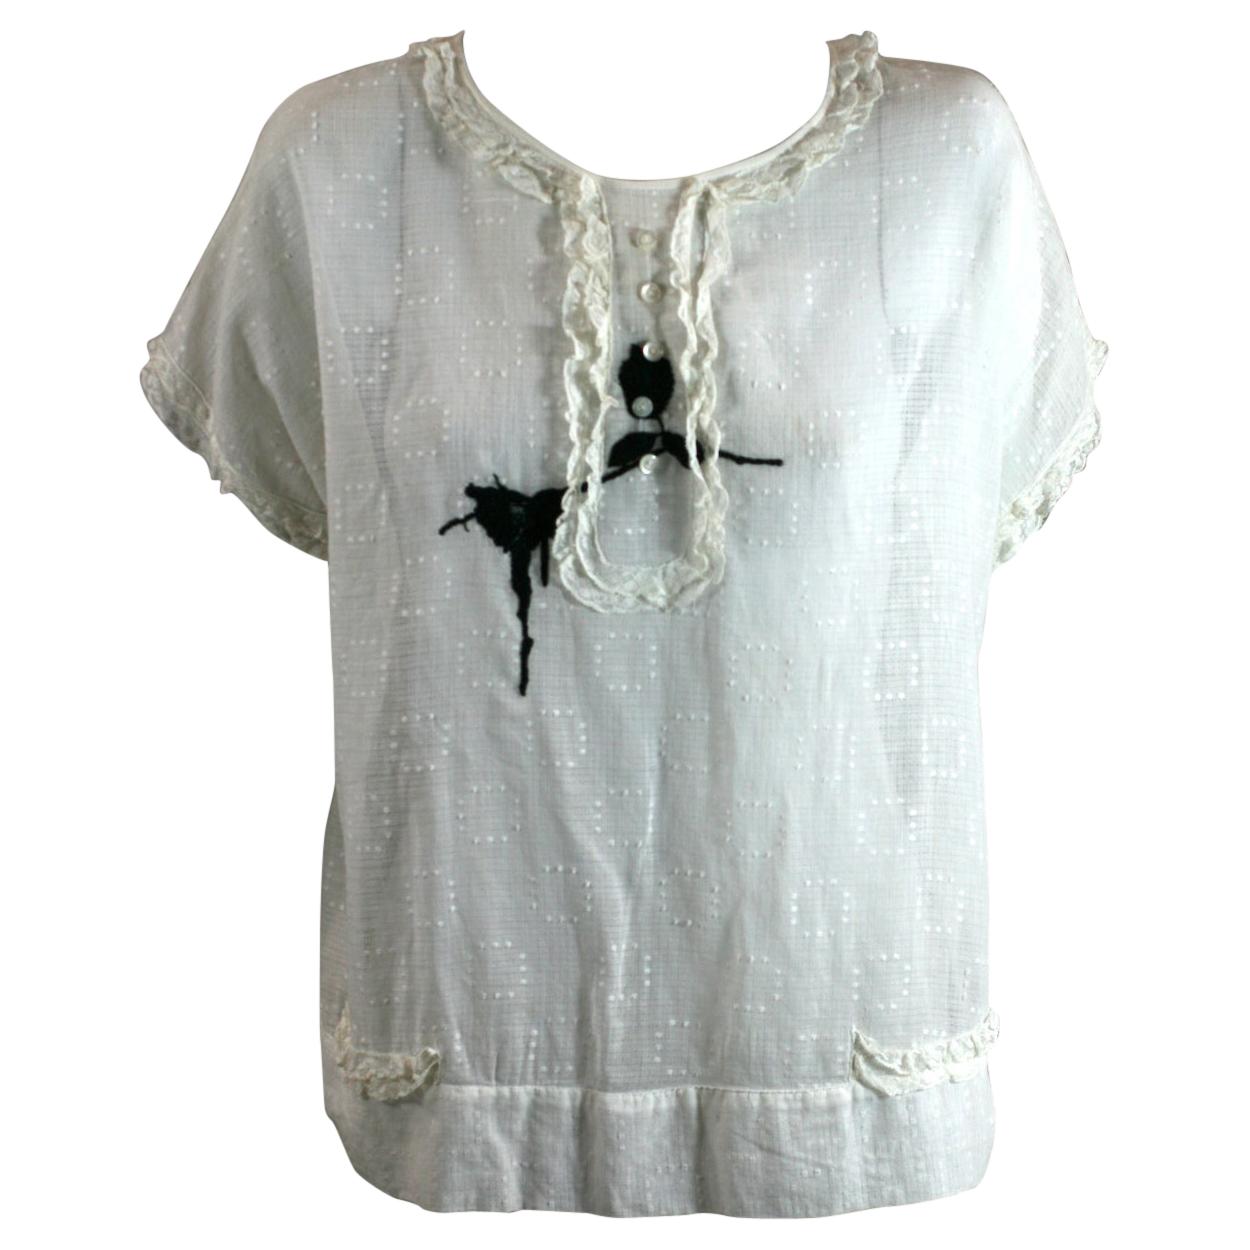 Upcycled Embroidered 1920's Batiste blouse, Studio VL